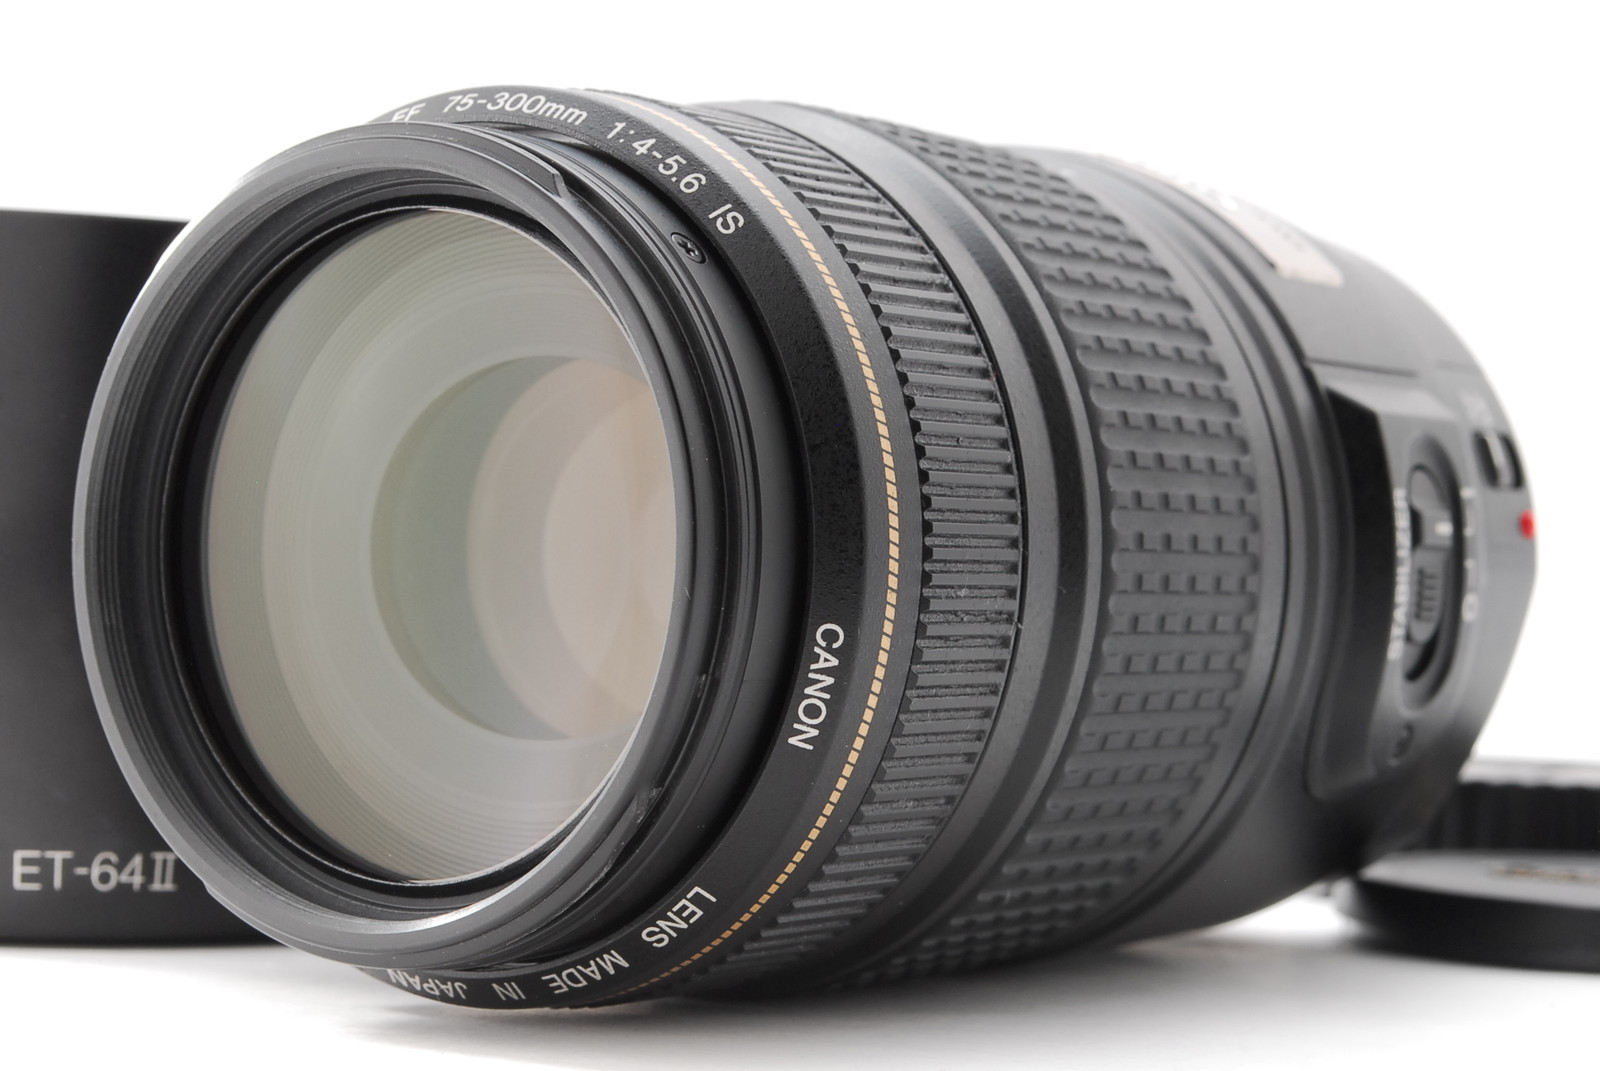 PROMOTION. EXC+++++ Canon ZOOM EF 75-300mm f/4-5.6 IS USM, Hood, Front Cap, Rear Cap from Japan